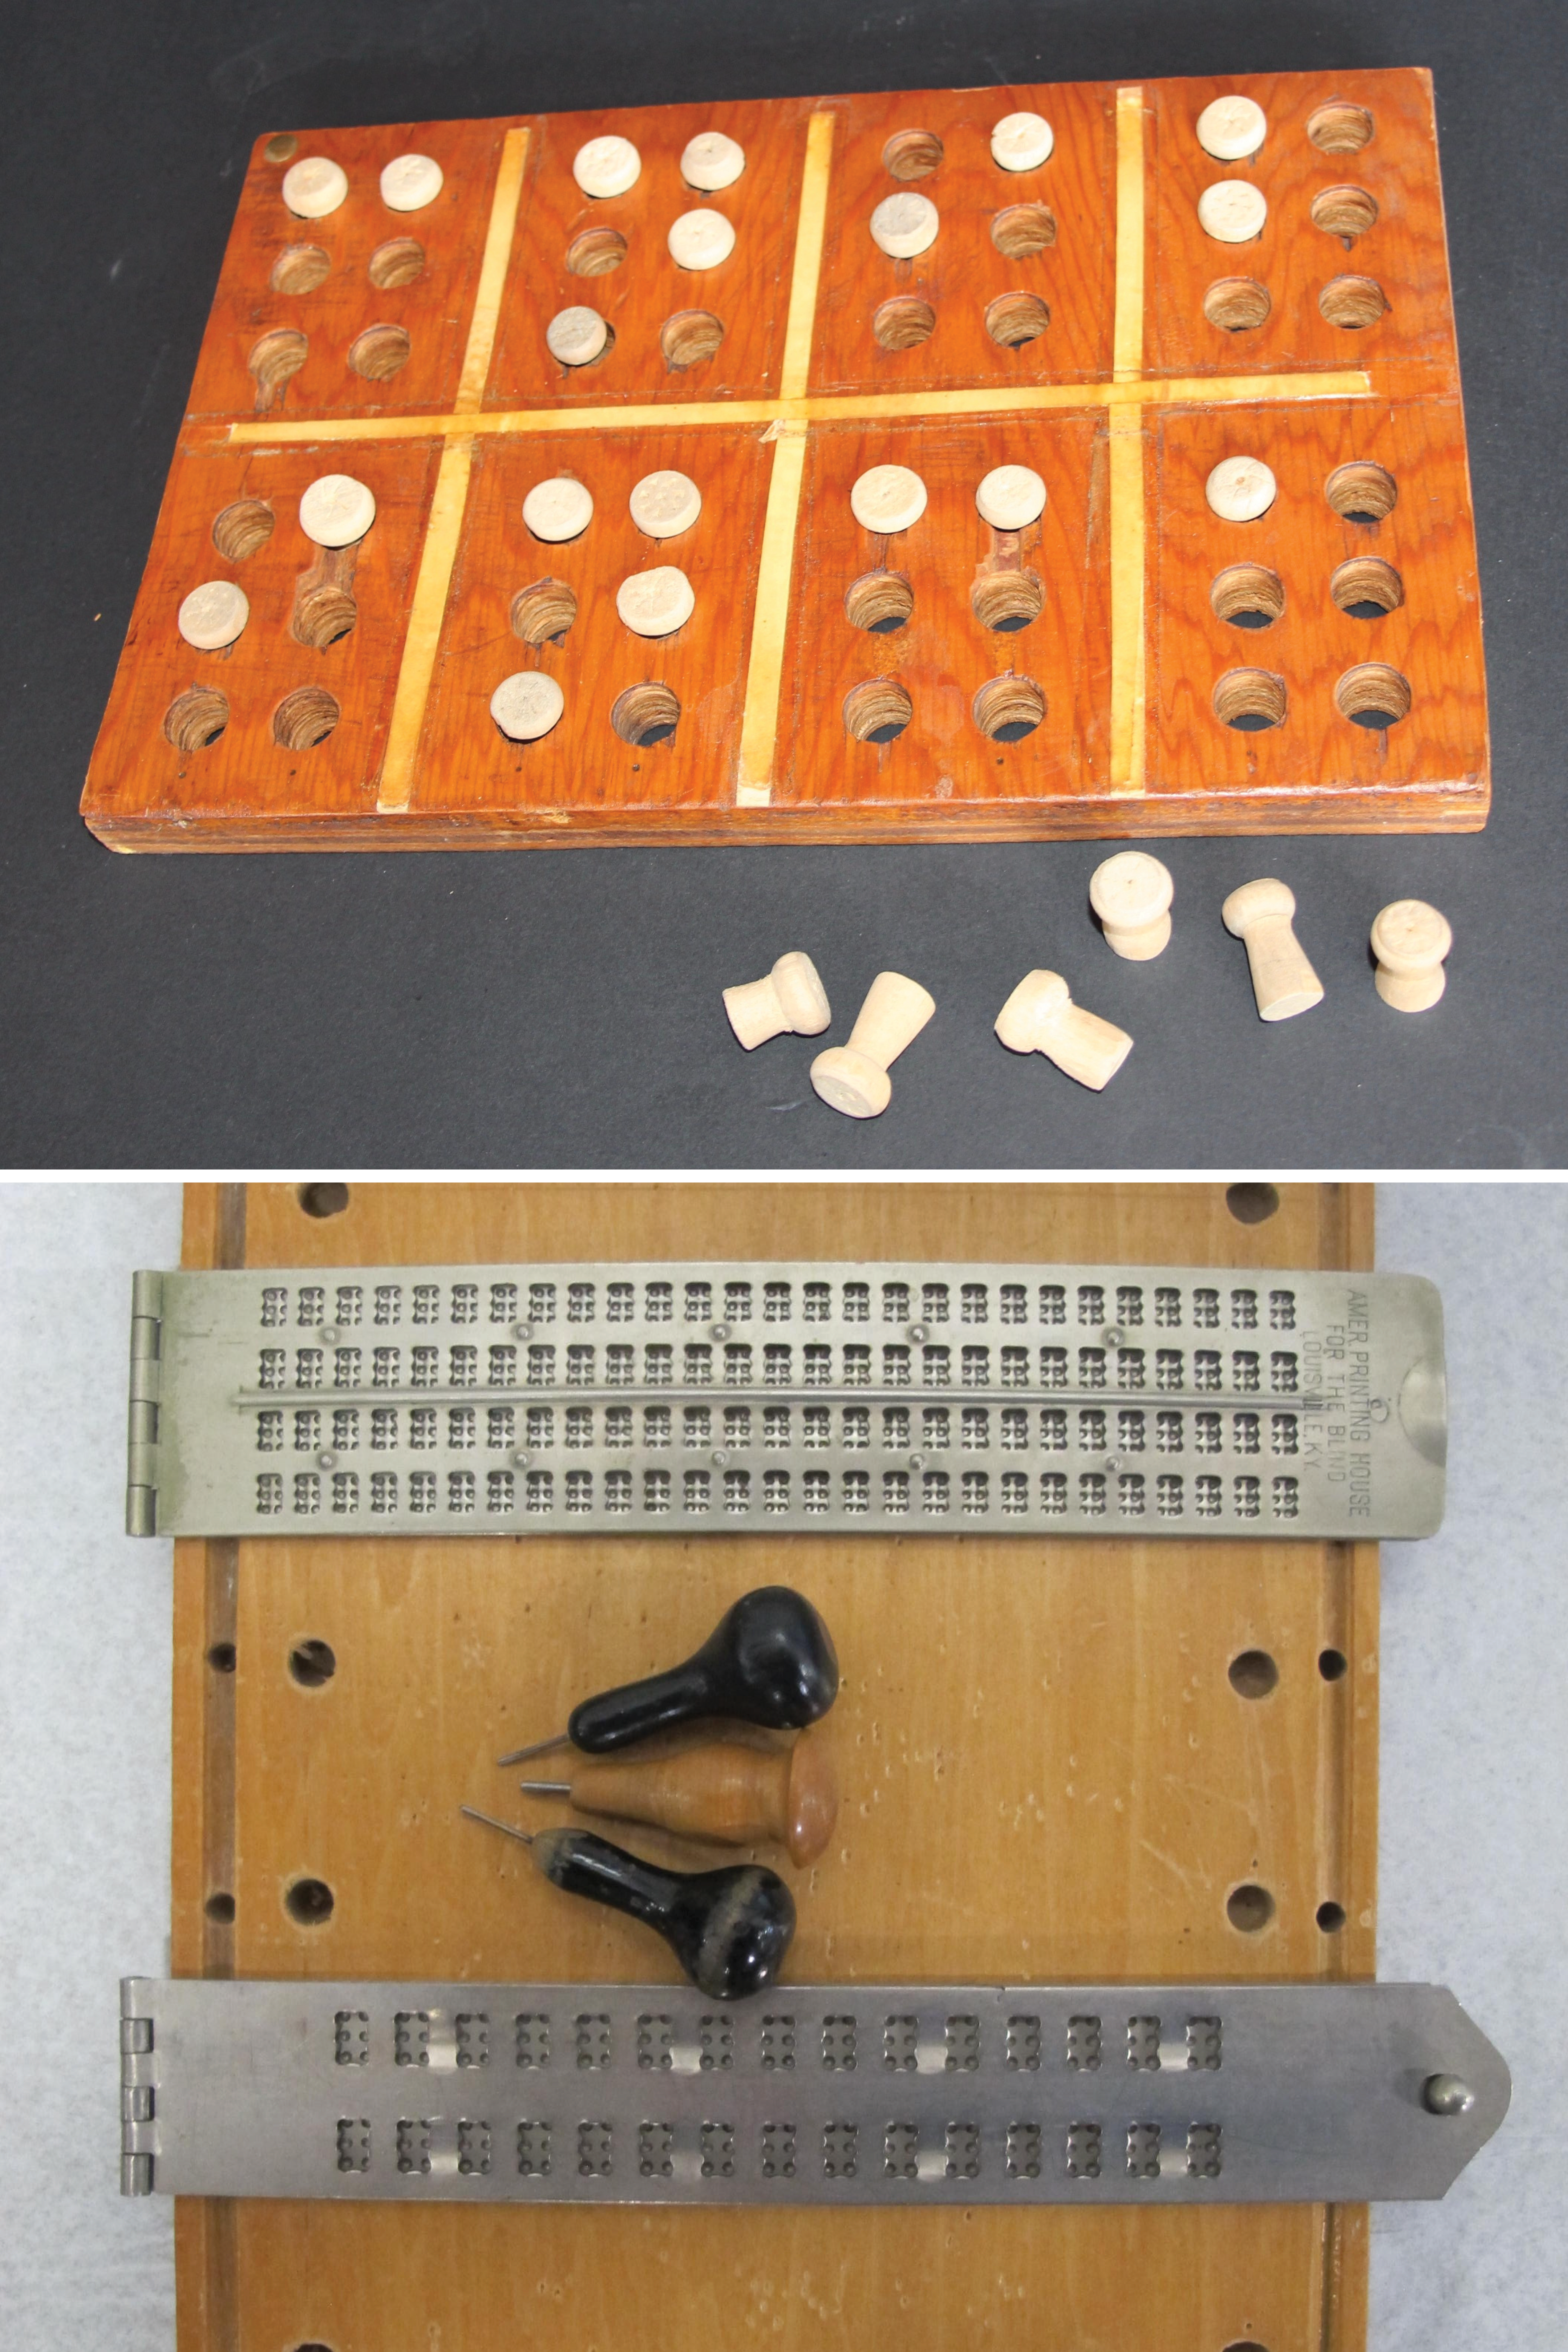 Top: A Braille teaching tool. A handmade wooden board with two rows of 6 dot braille cells and wooden pegs.  Braille in this photograph reads CNIB on the top row and INCA on the second row. Bottom: A Braille slate and stylus. 